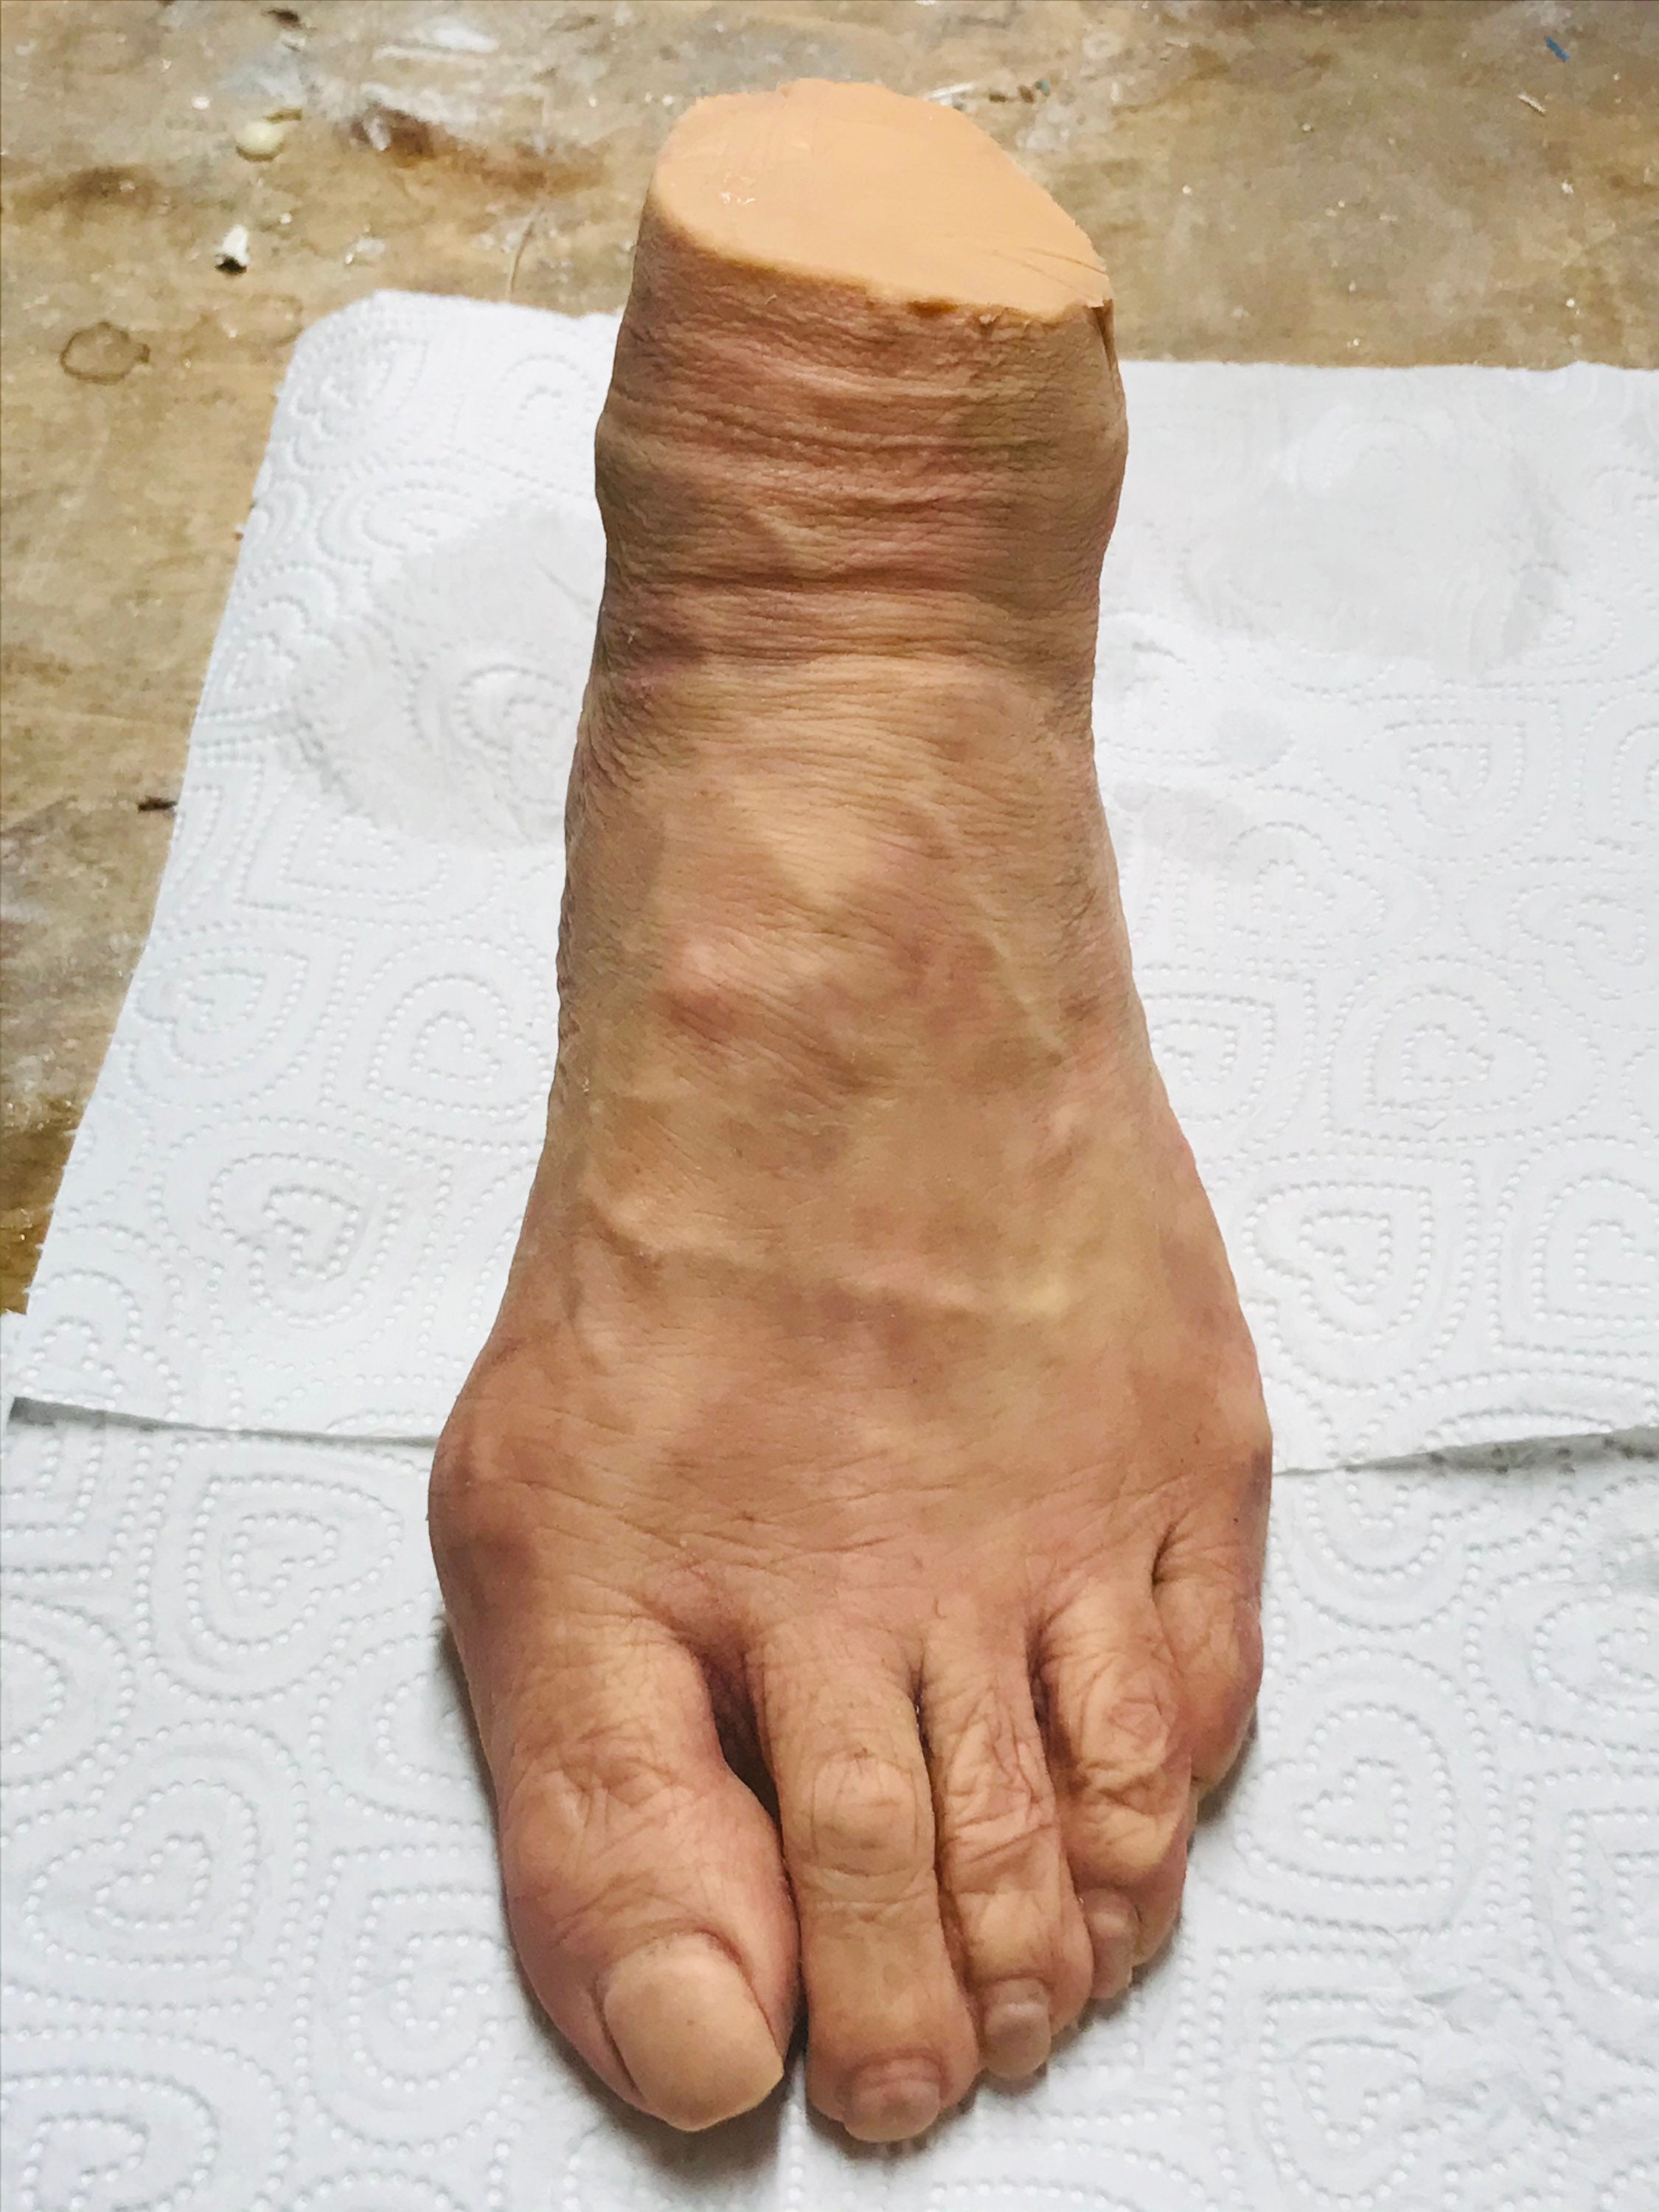 Realistic Human Foot Old Woman Left Foot / Flat Sole / Lifesize 